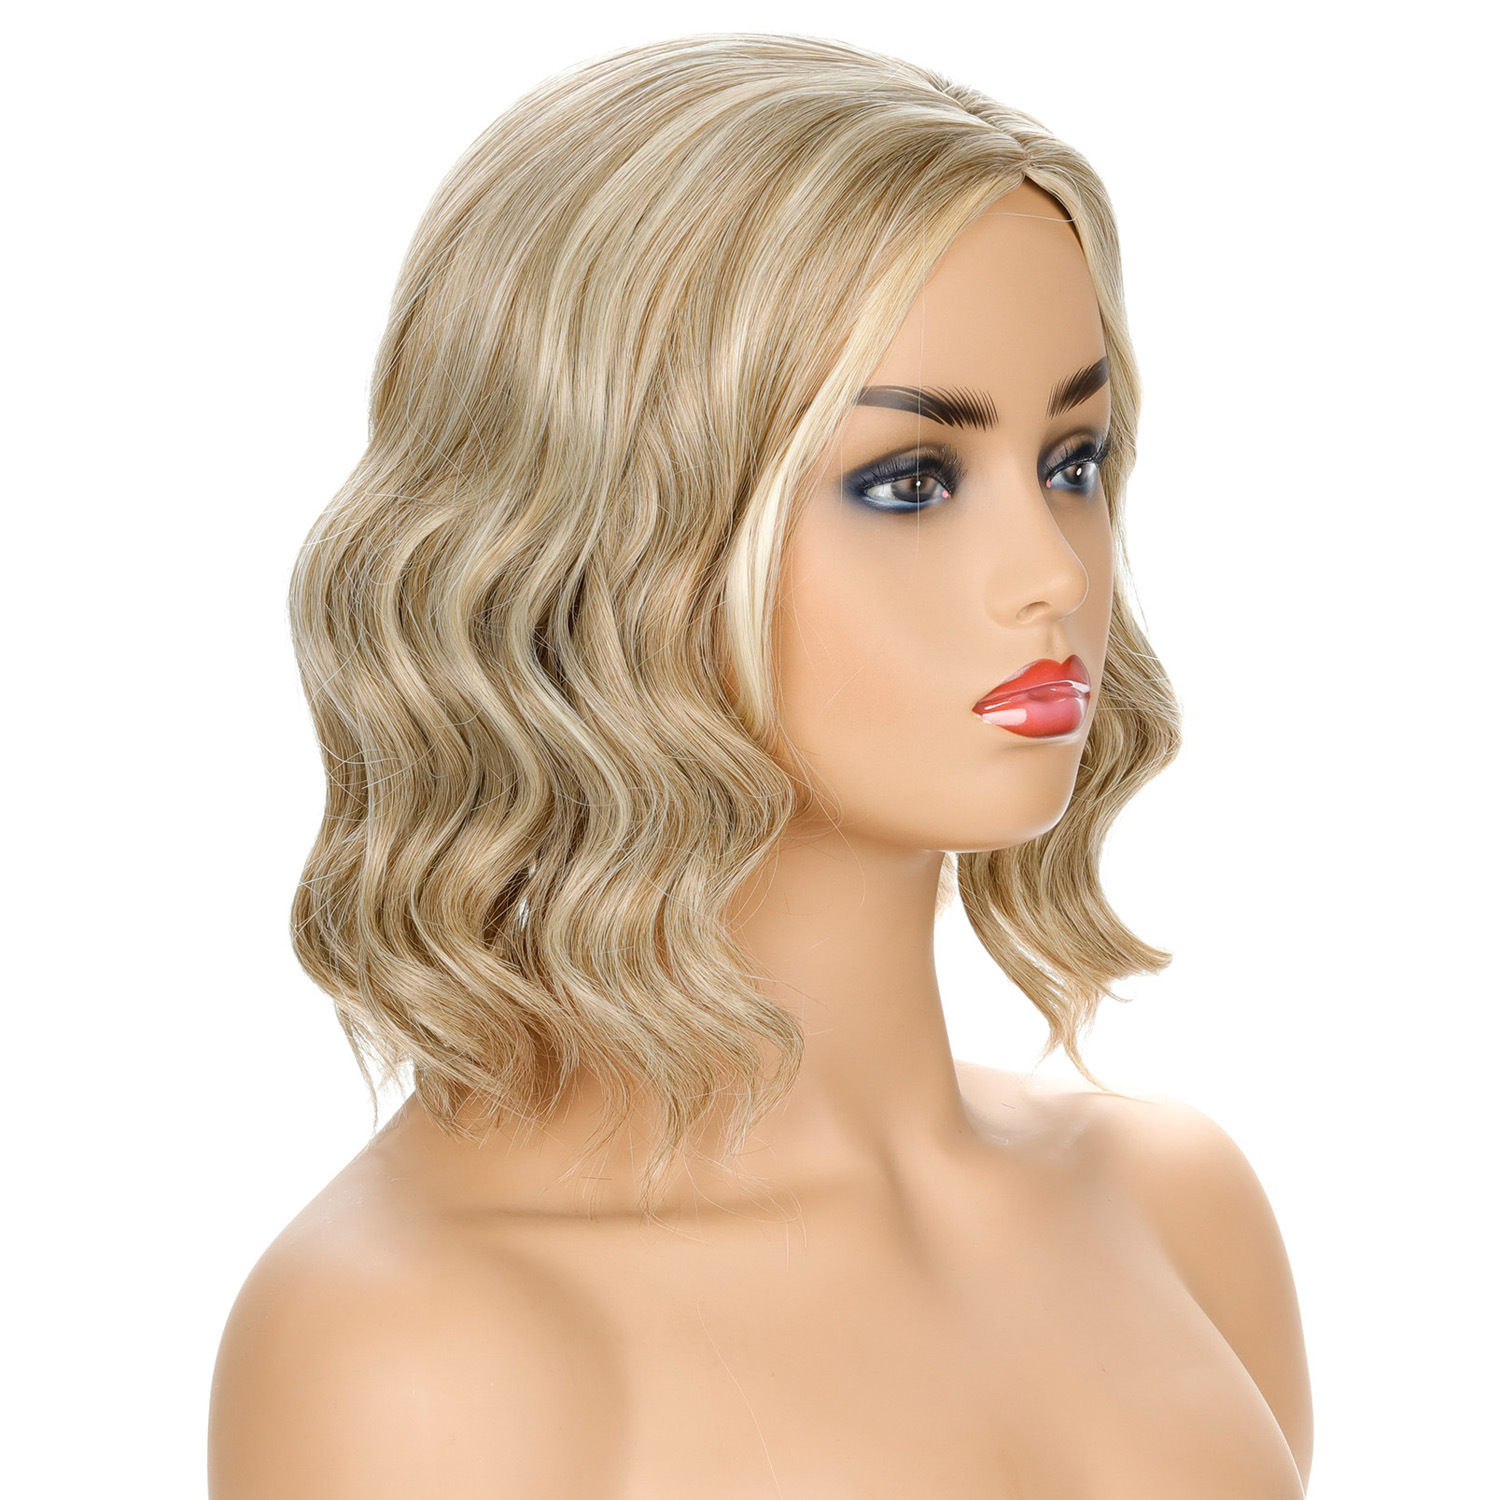 Chic blonde fashion synthetic wig with wavy curly hair and mid-part, designed for a stylish look